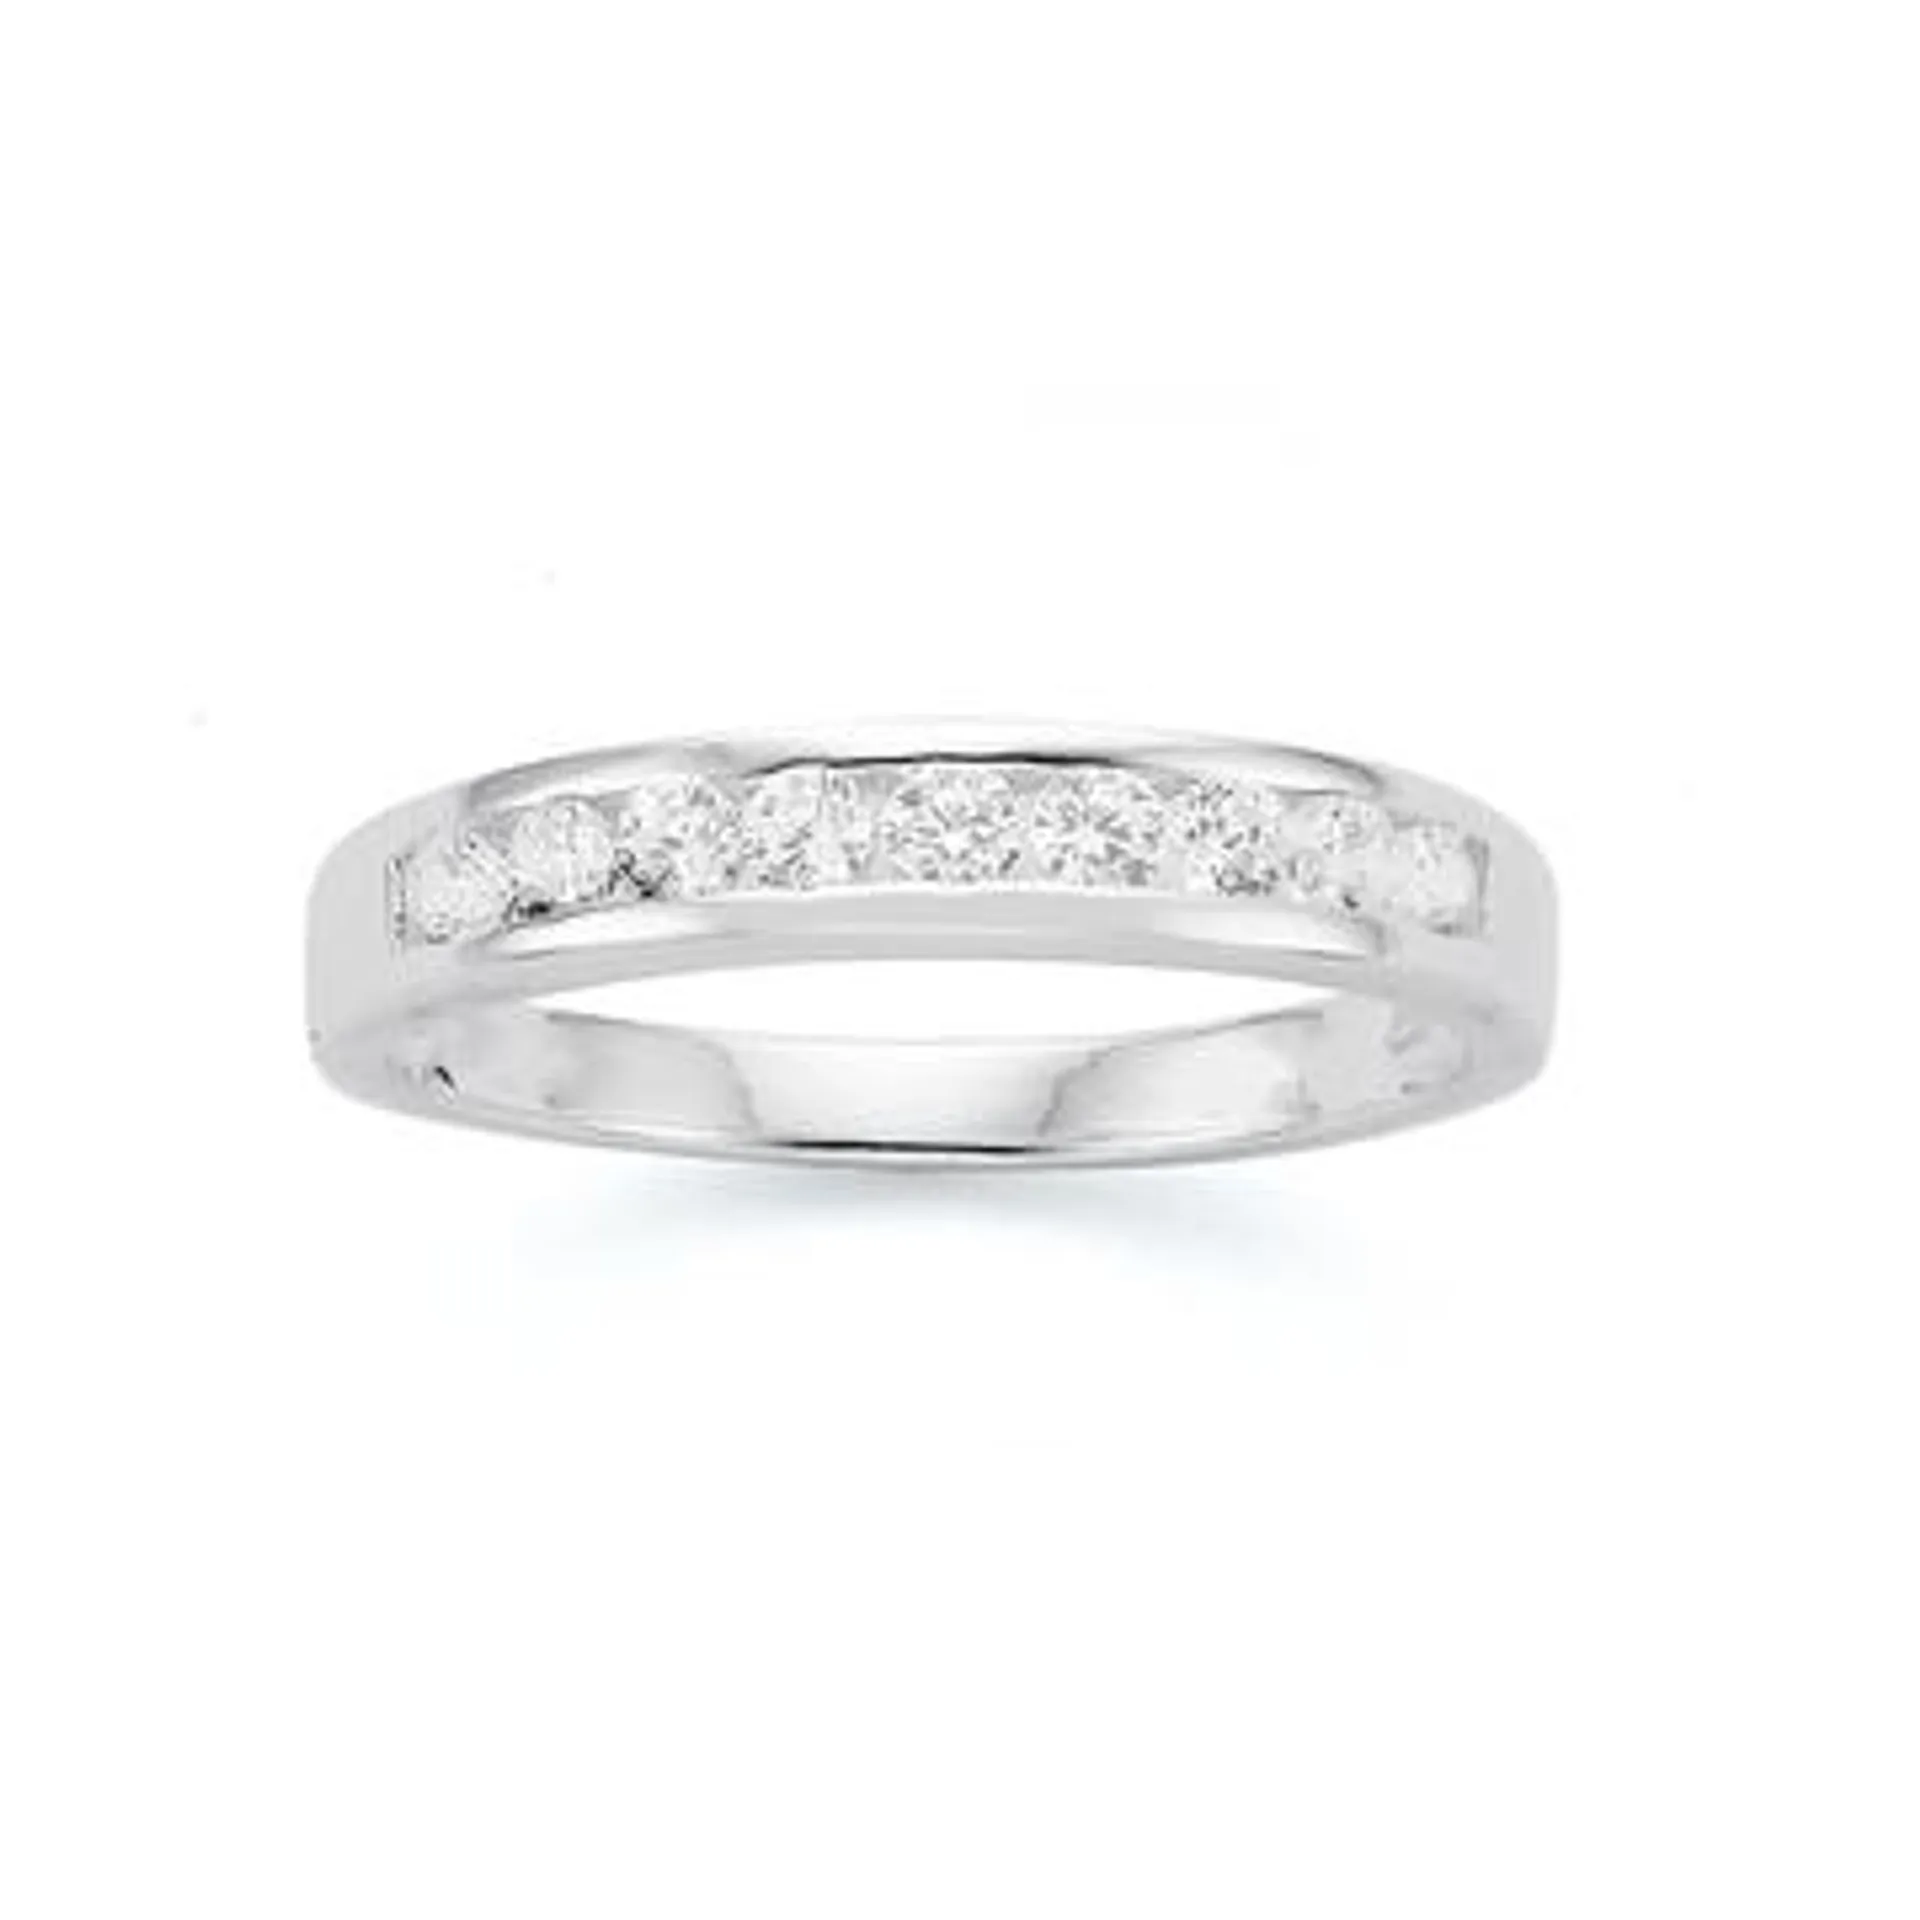 Sterling Silver Cubic Zirconia Channel Set Ring